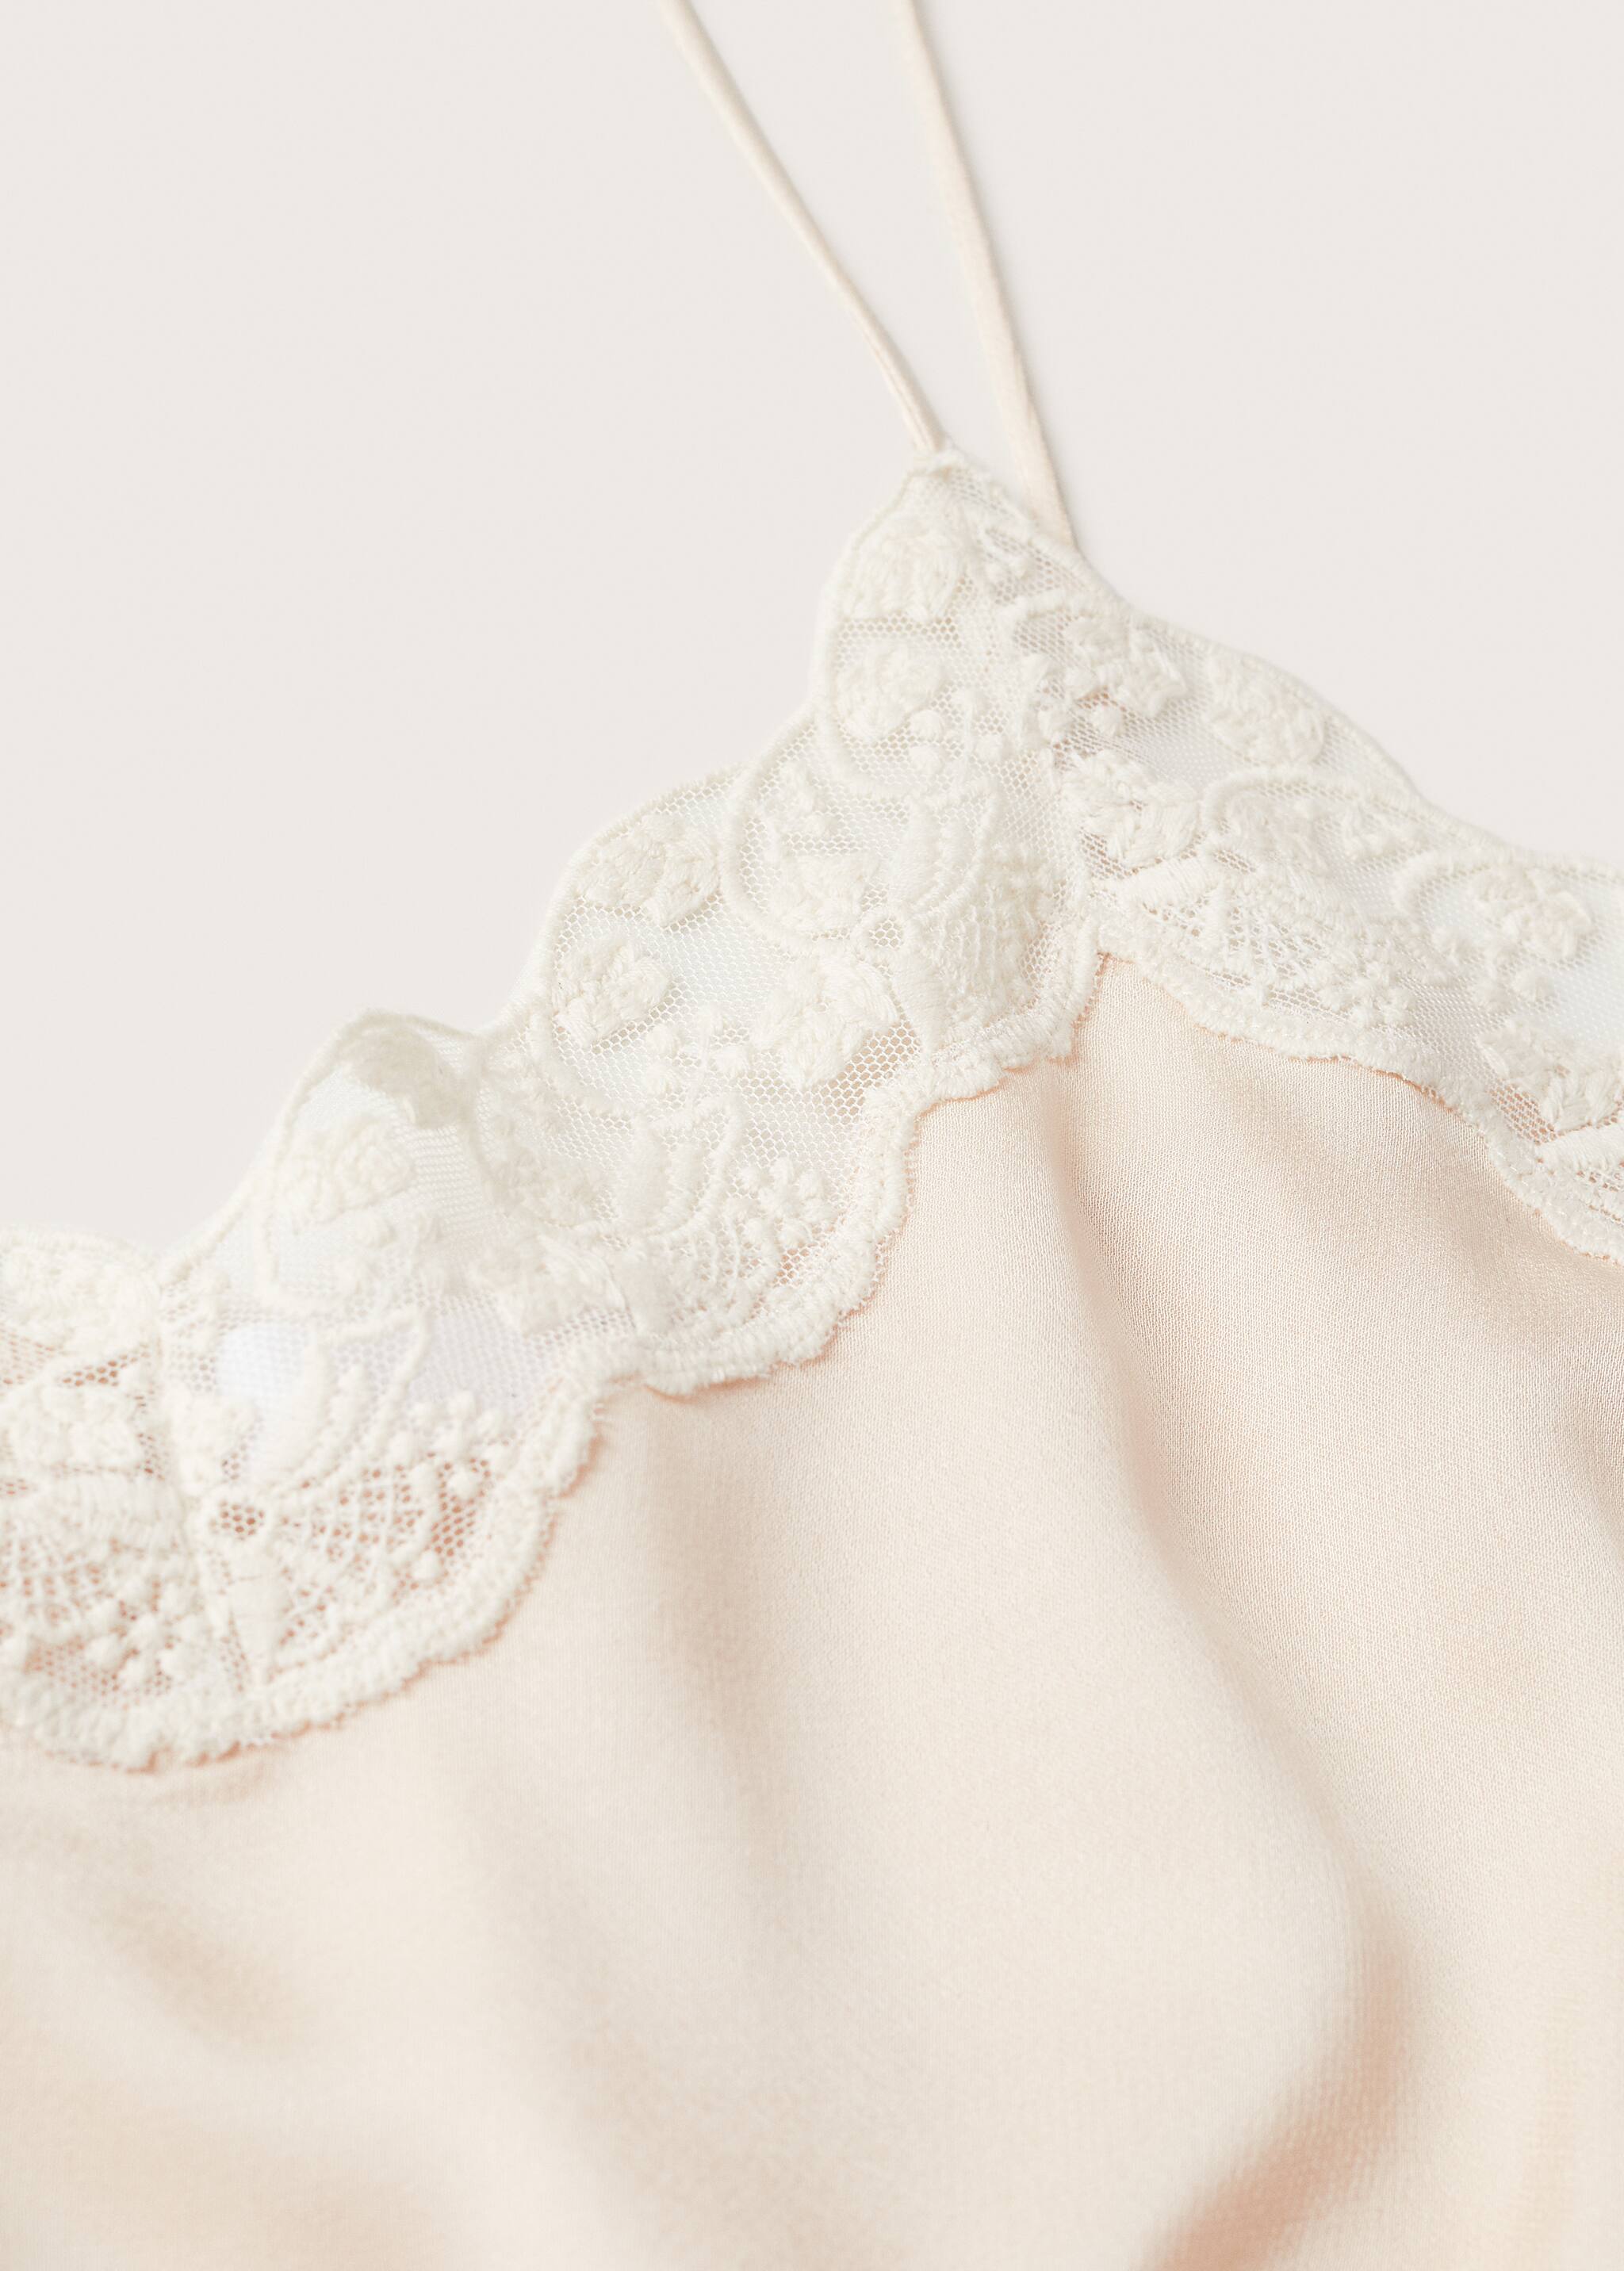 Lace top - Details of the article 8